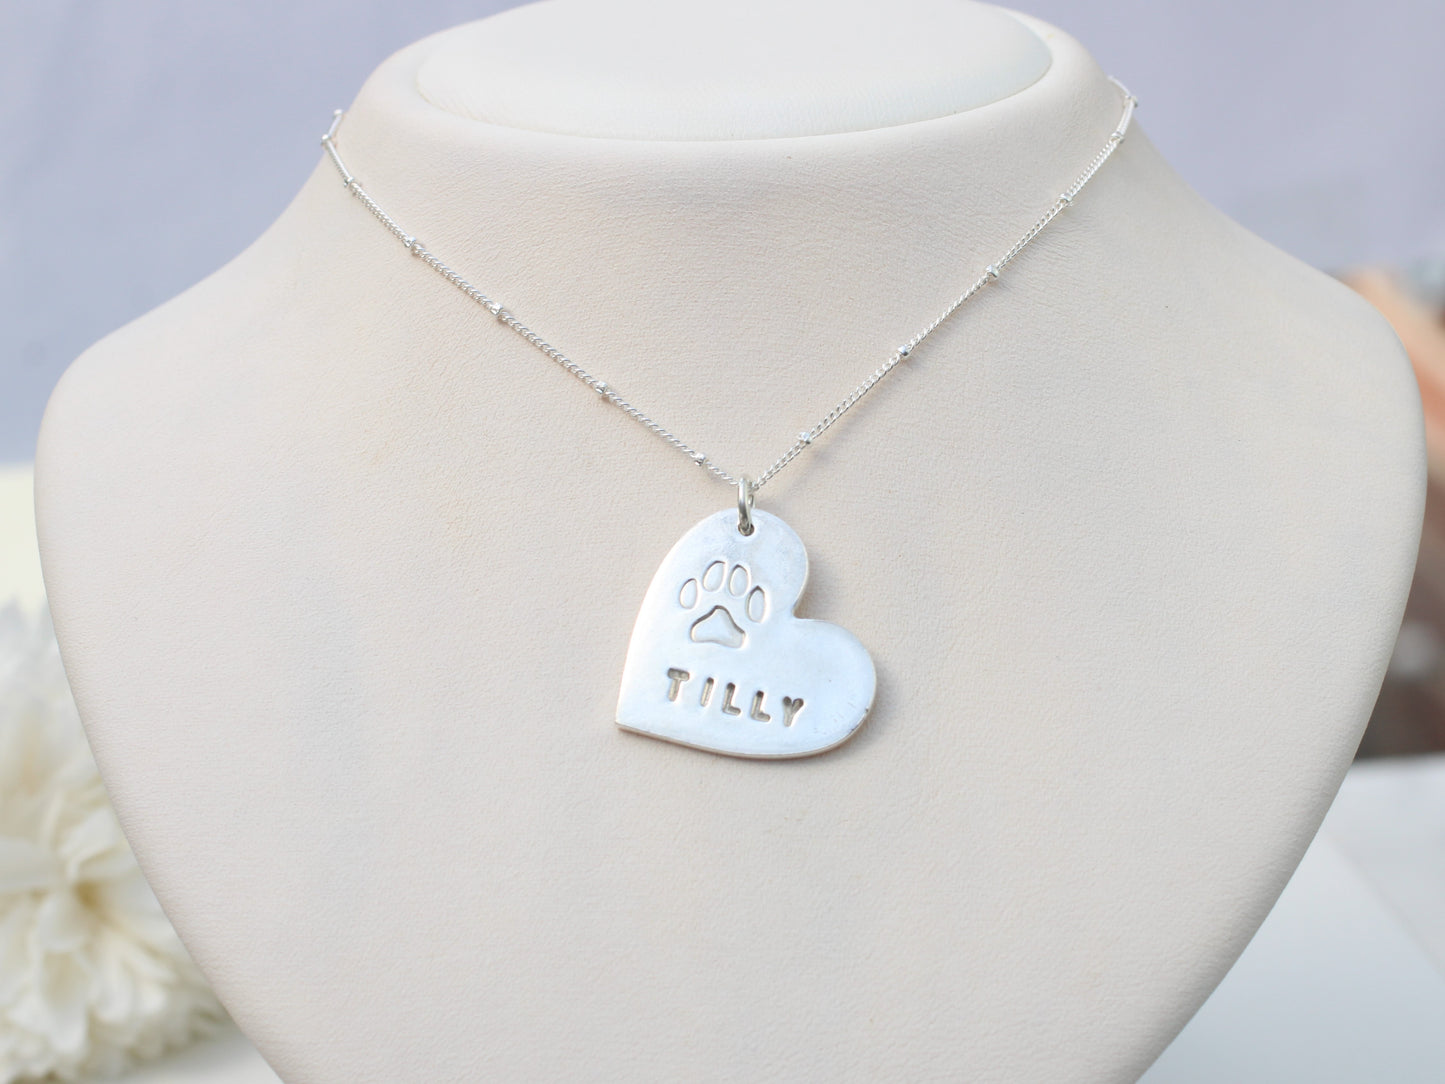 Personalised paw print necklace.